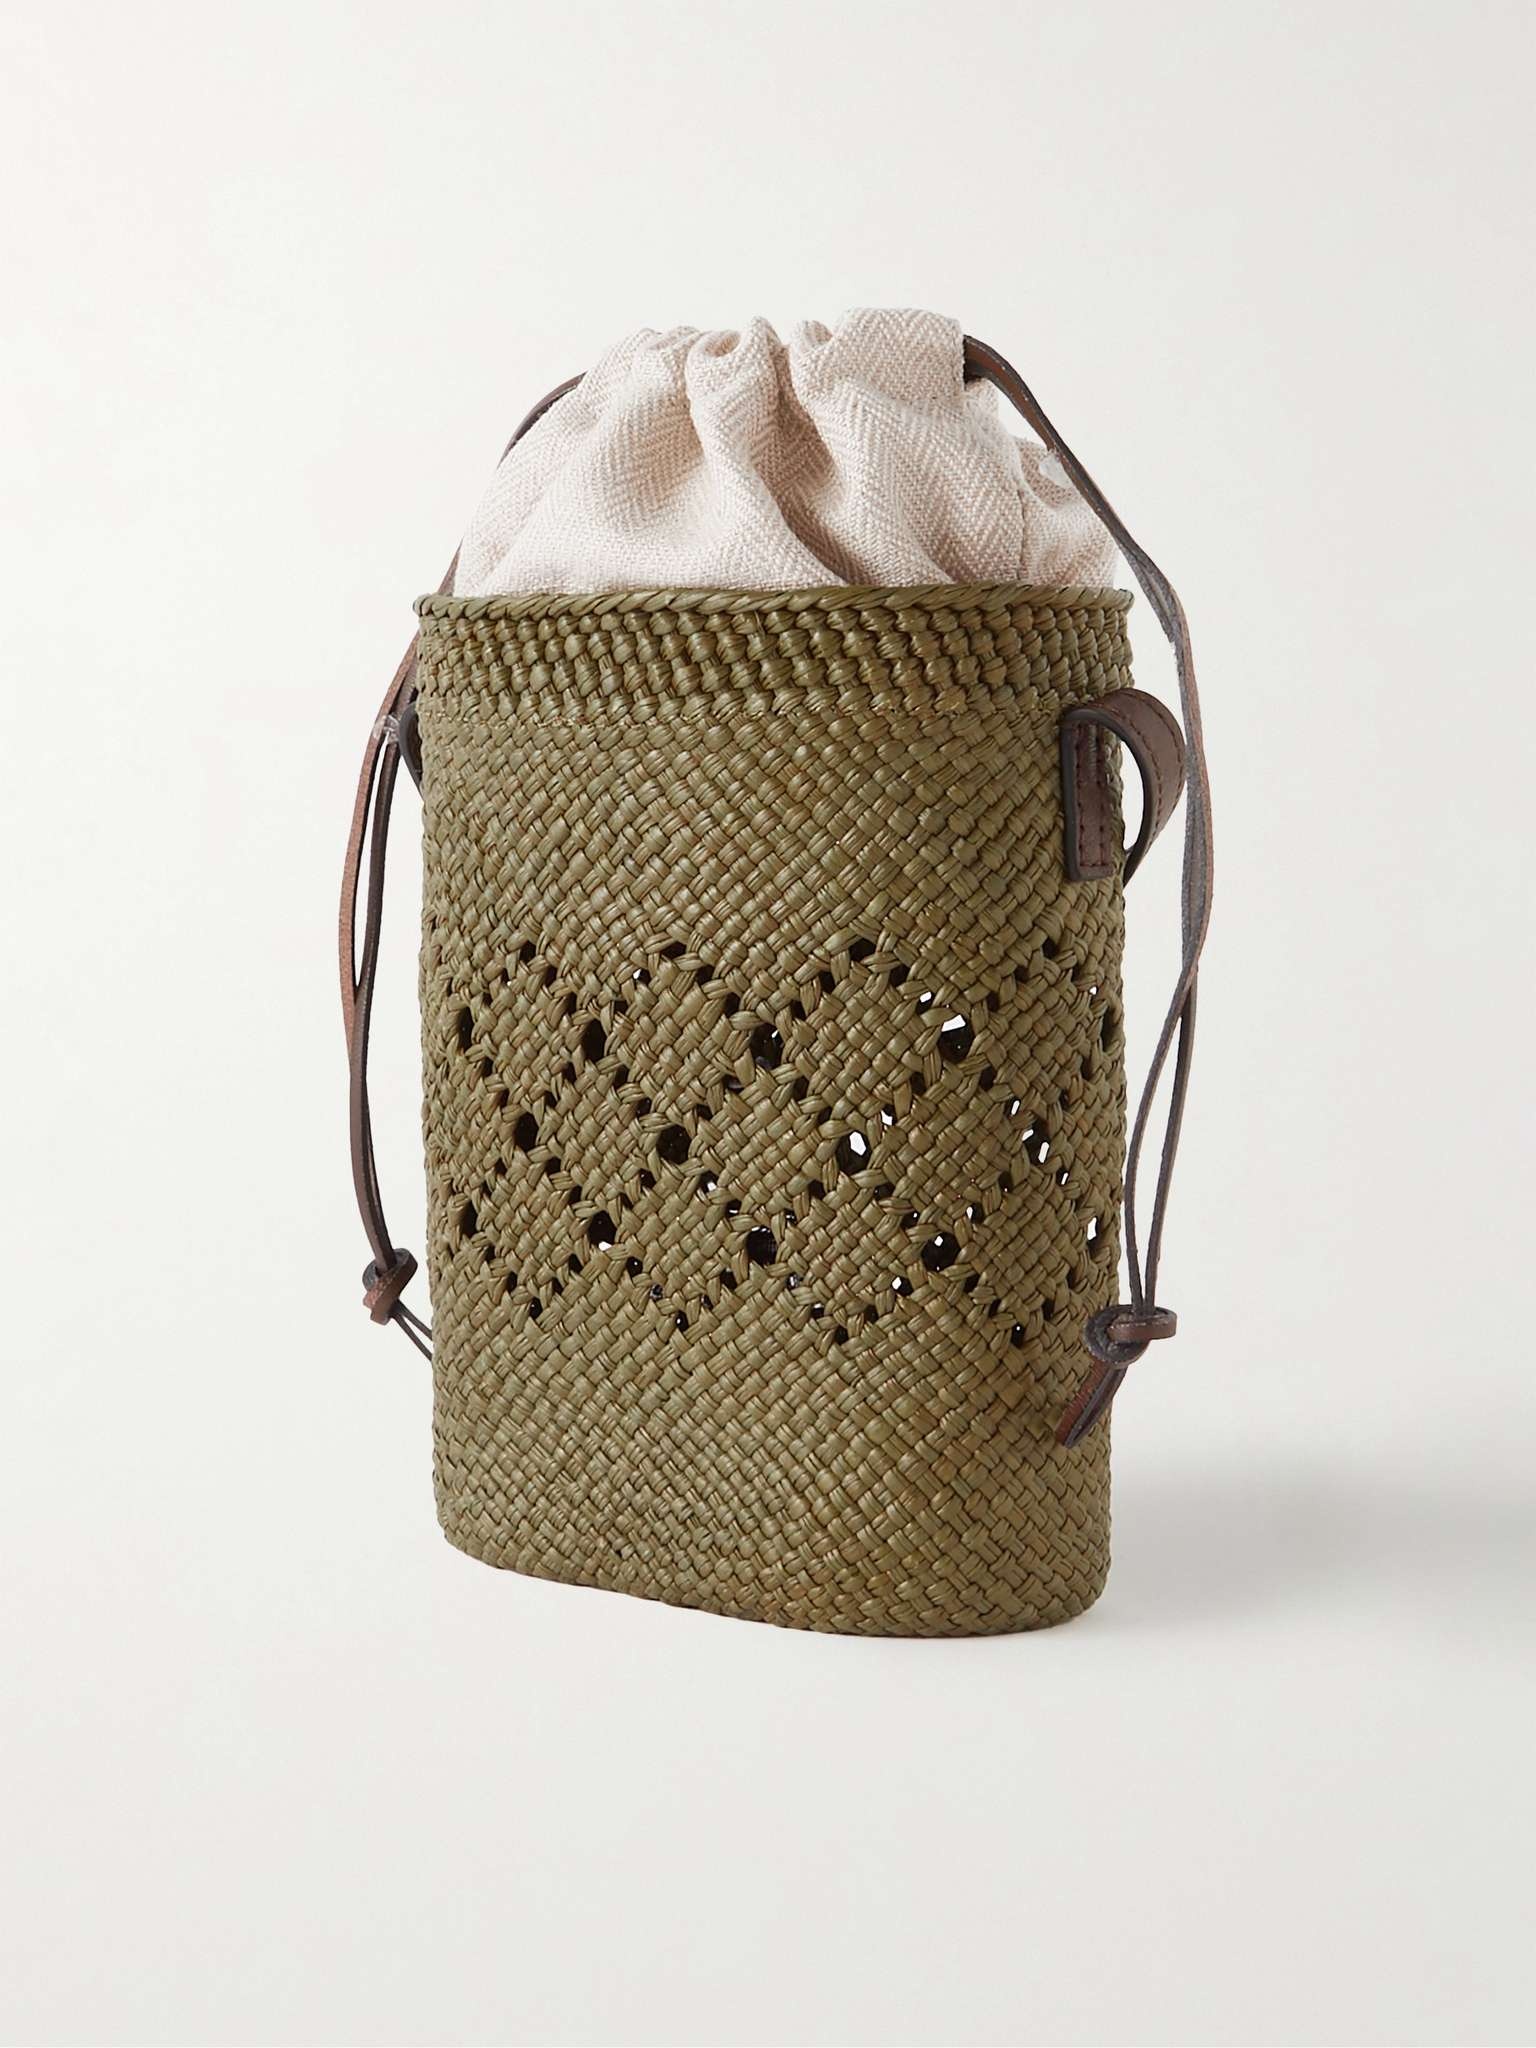 + Paula’s Ibiza Leather-Trimmed Iraca Palm and Herringbone Cotton-Canvas Pouch - 4